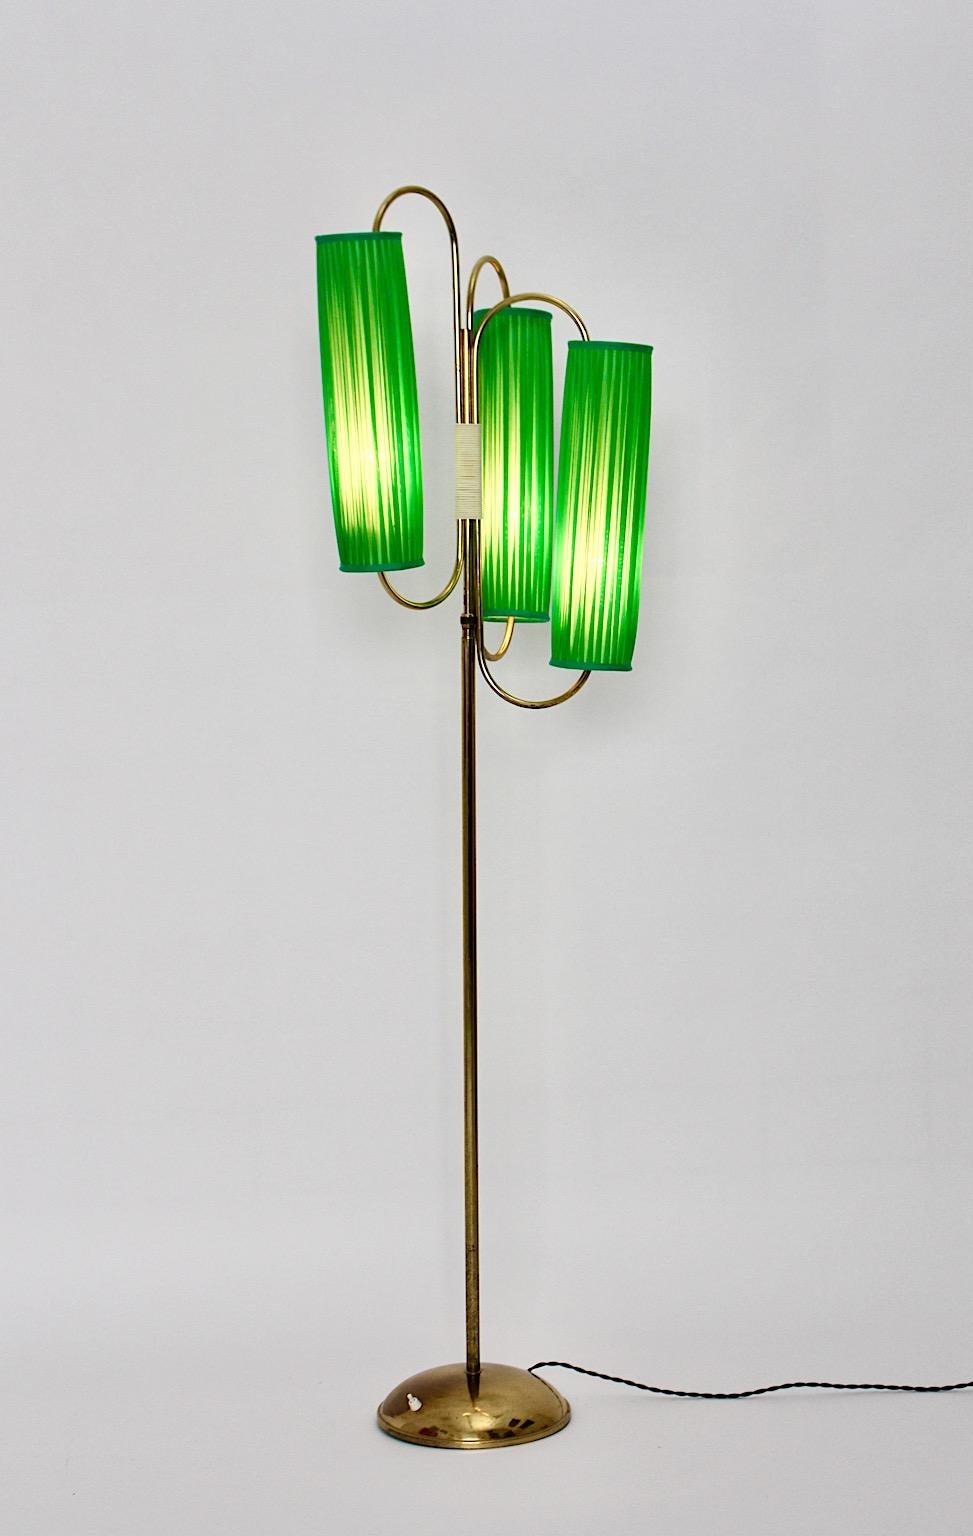 Mid-Century Modern vintage floor lamp from brass with pleated silk shades in green color 1950s Italy.
A beautiful new arrival, this Mid-Century Modern floor lamp from brass with new made pleated silk shades in its original shape in bold fresh grass